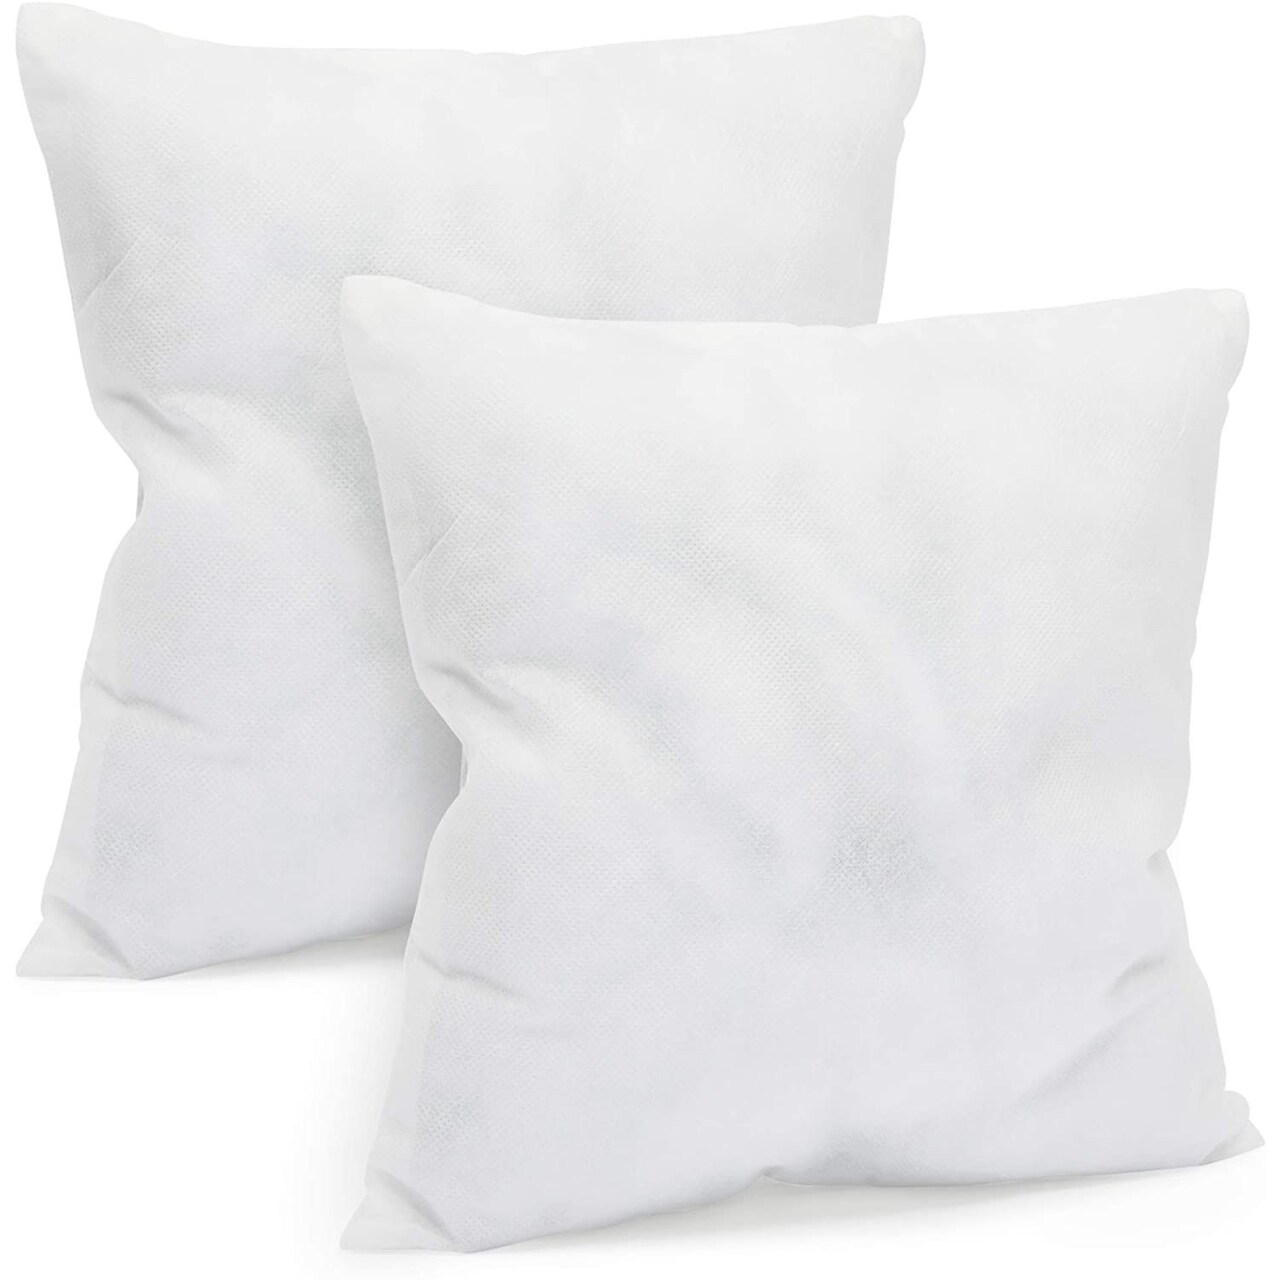 Hypoallergenic Throw Pillow Insert Stuffers (White, 18 x 18 Inches, 2 Pack)